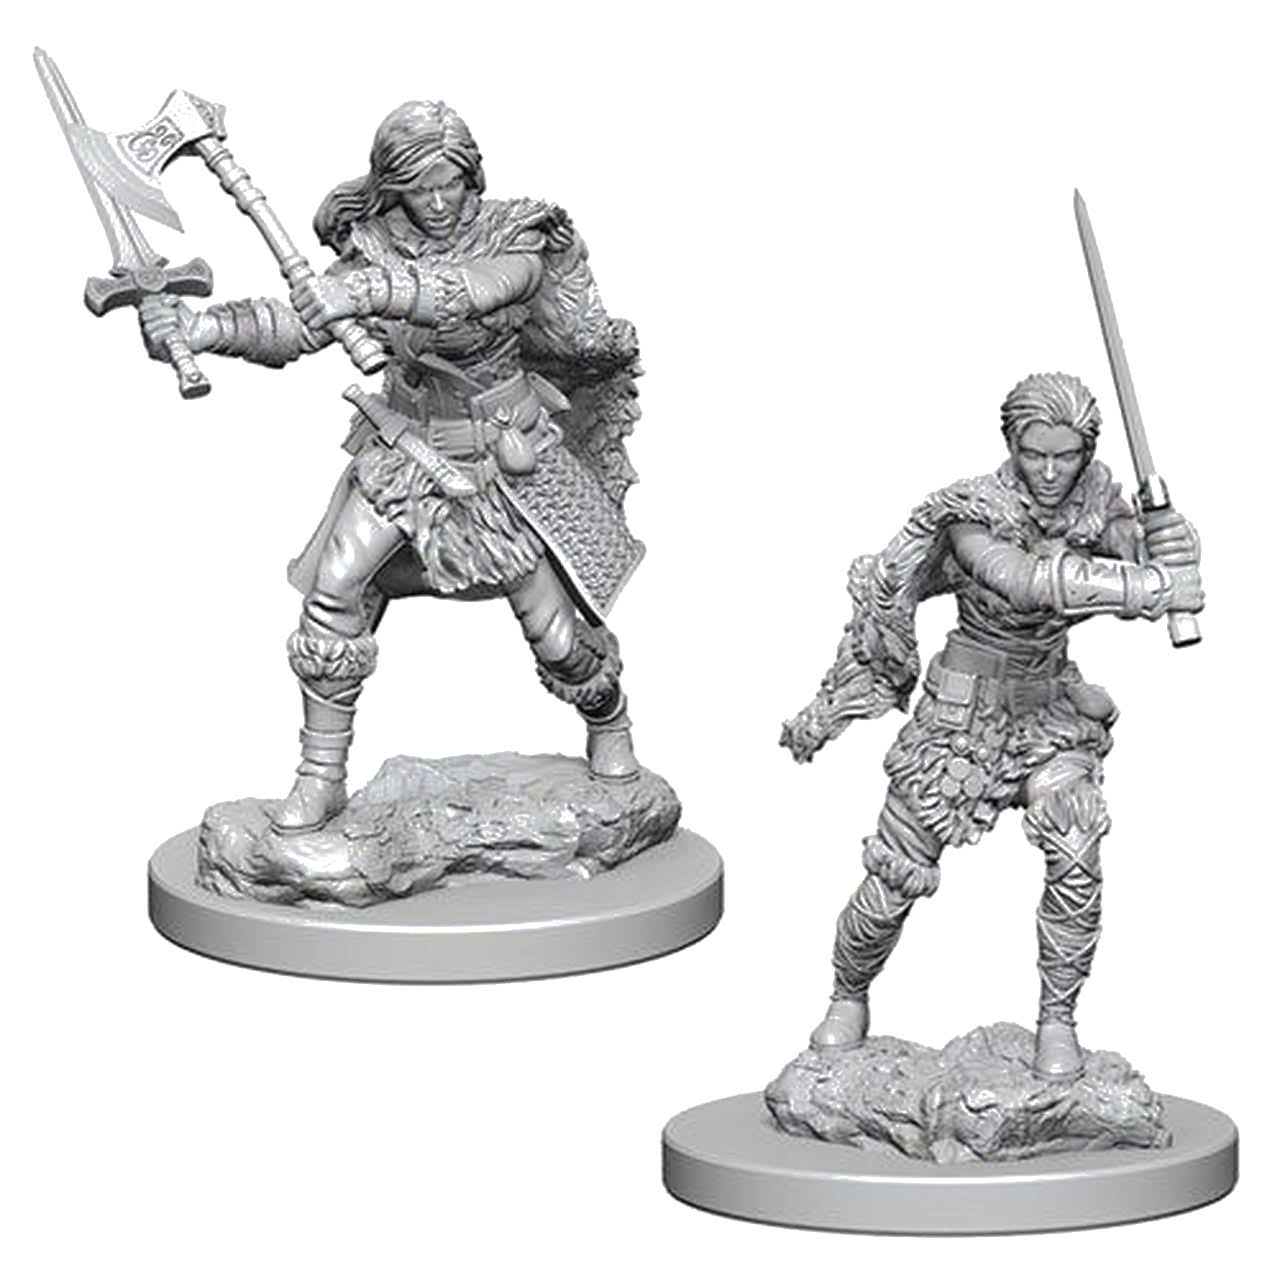 Dungeons & Dragons: Nolzur’s Marvelous Unpainted Minis - Human Female Barbarian